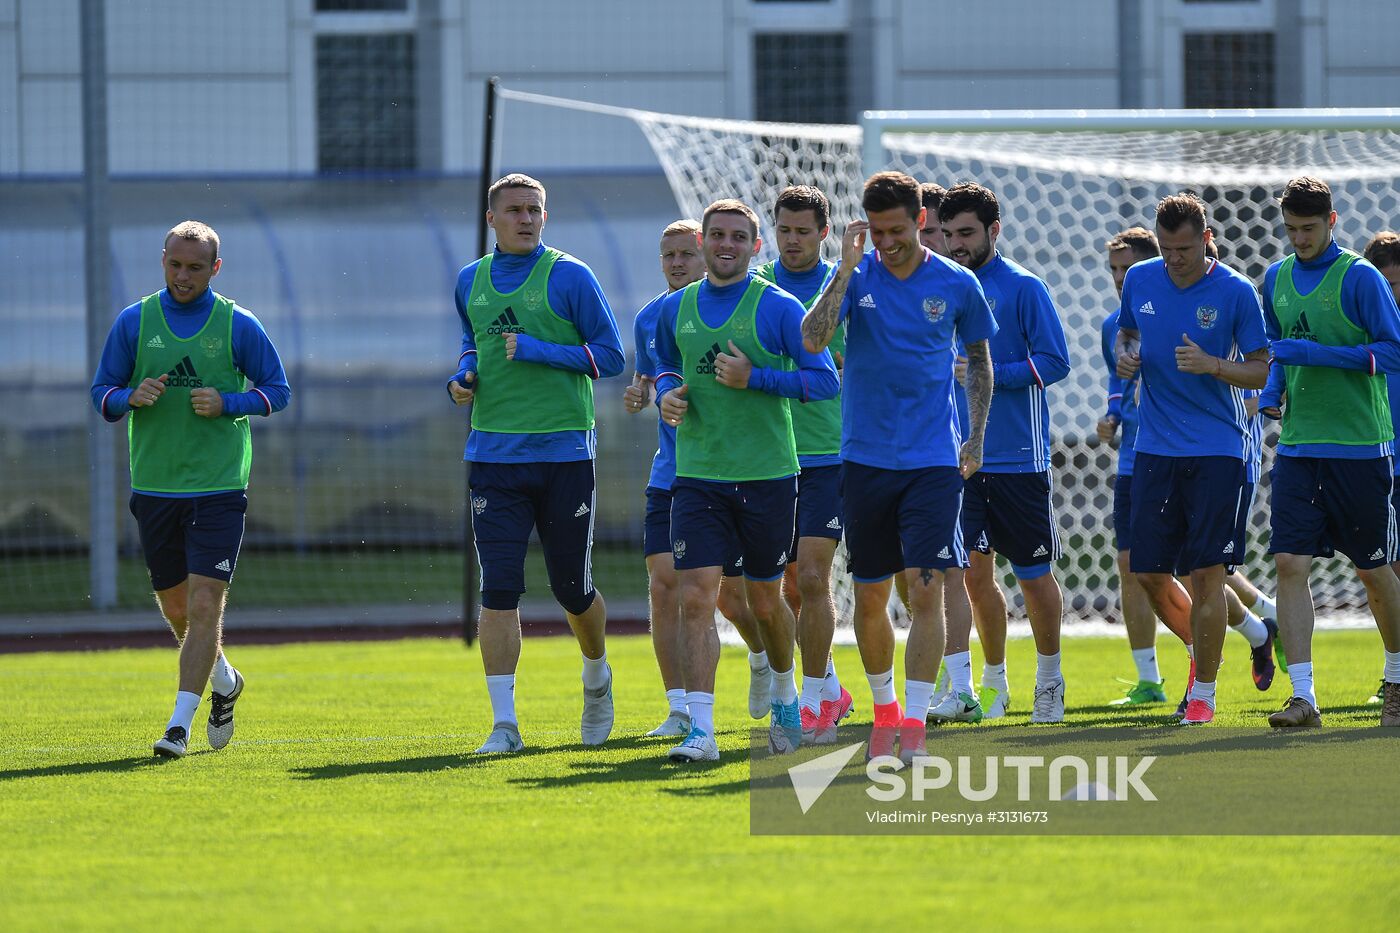 2017 FIFA Confederations Cup. Russia's national team holds training session